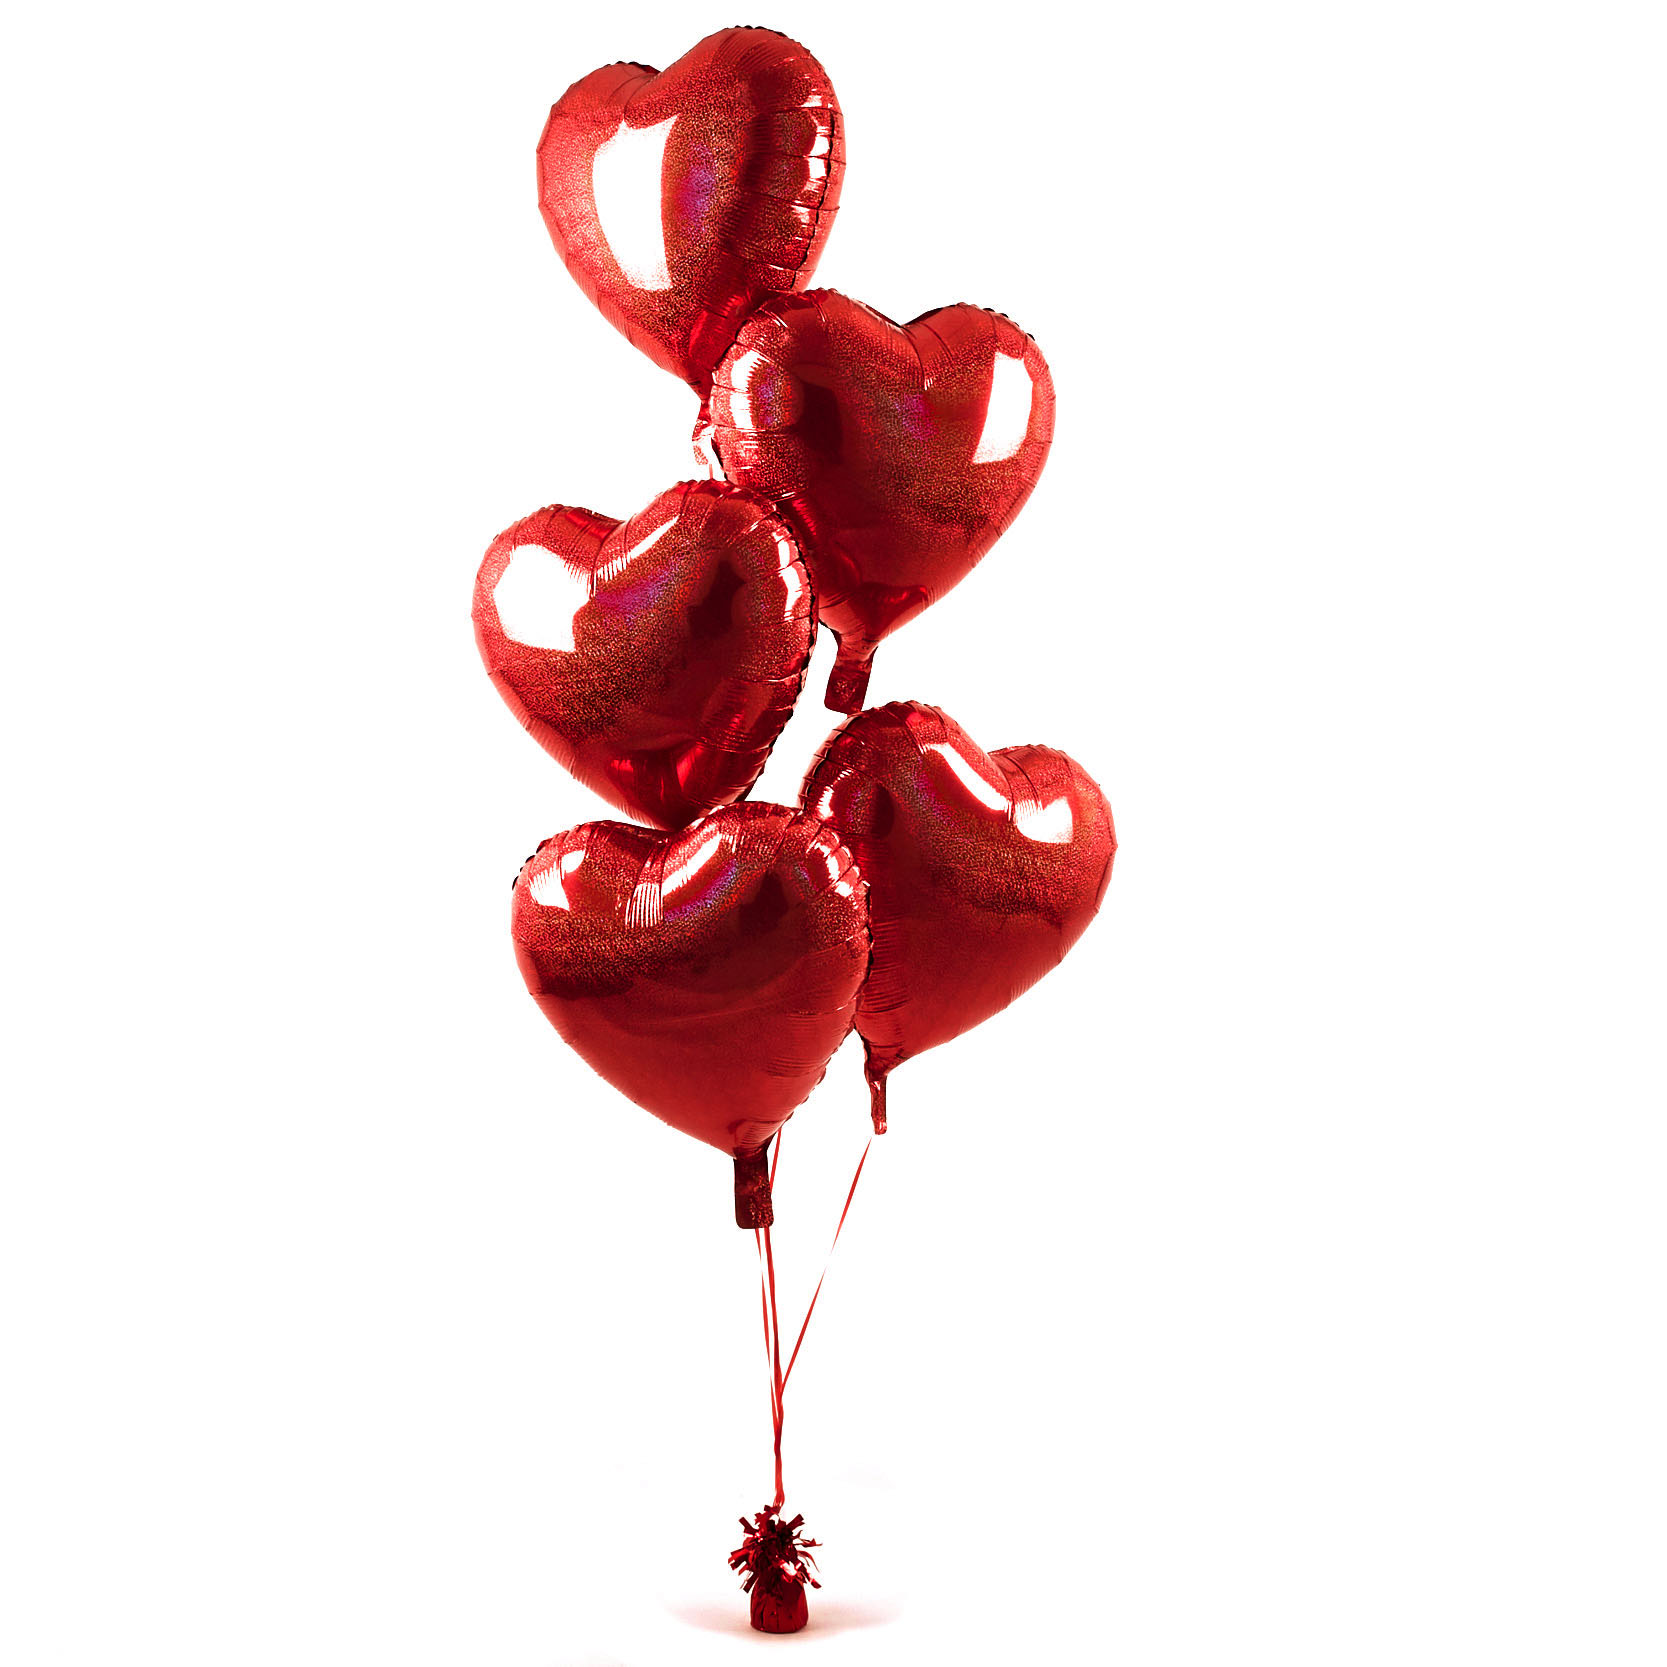 5 Red Hearts Balloon Bouquet - DELIVERED INFLATED!